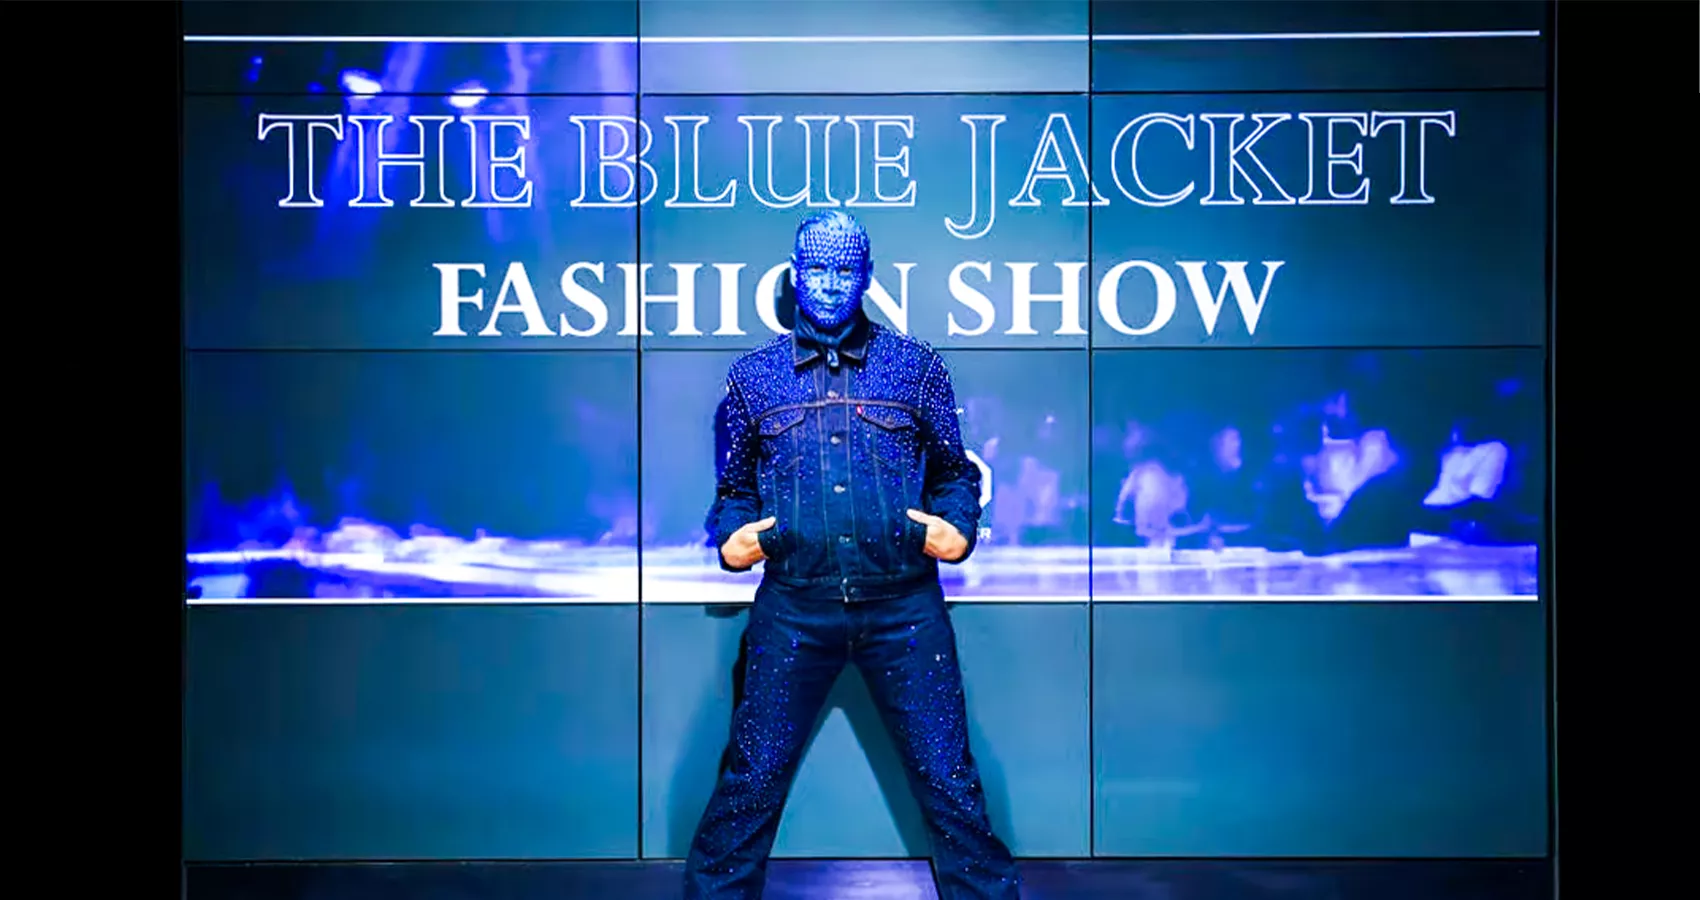 A man wearing sparkly denim with his face fully covered in blue makeup and sequins at the Blue Jacket Fashion Show in 2023